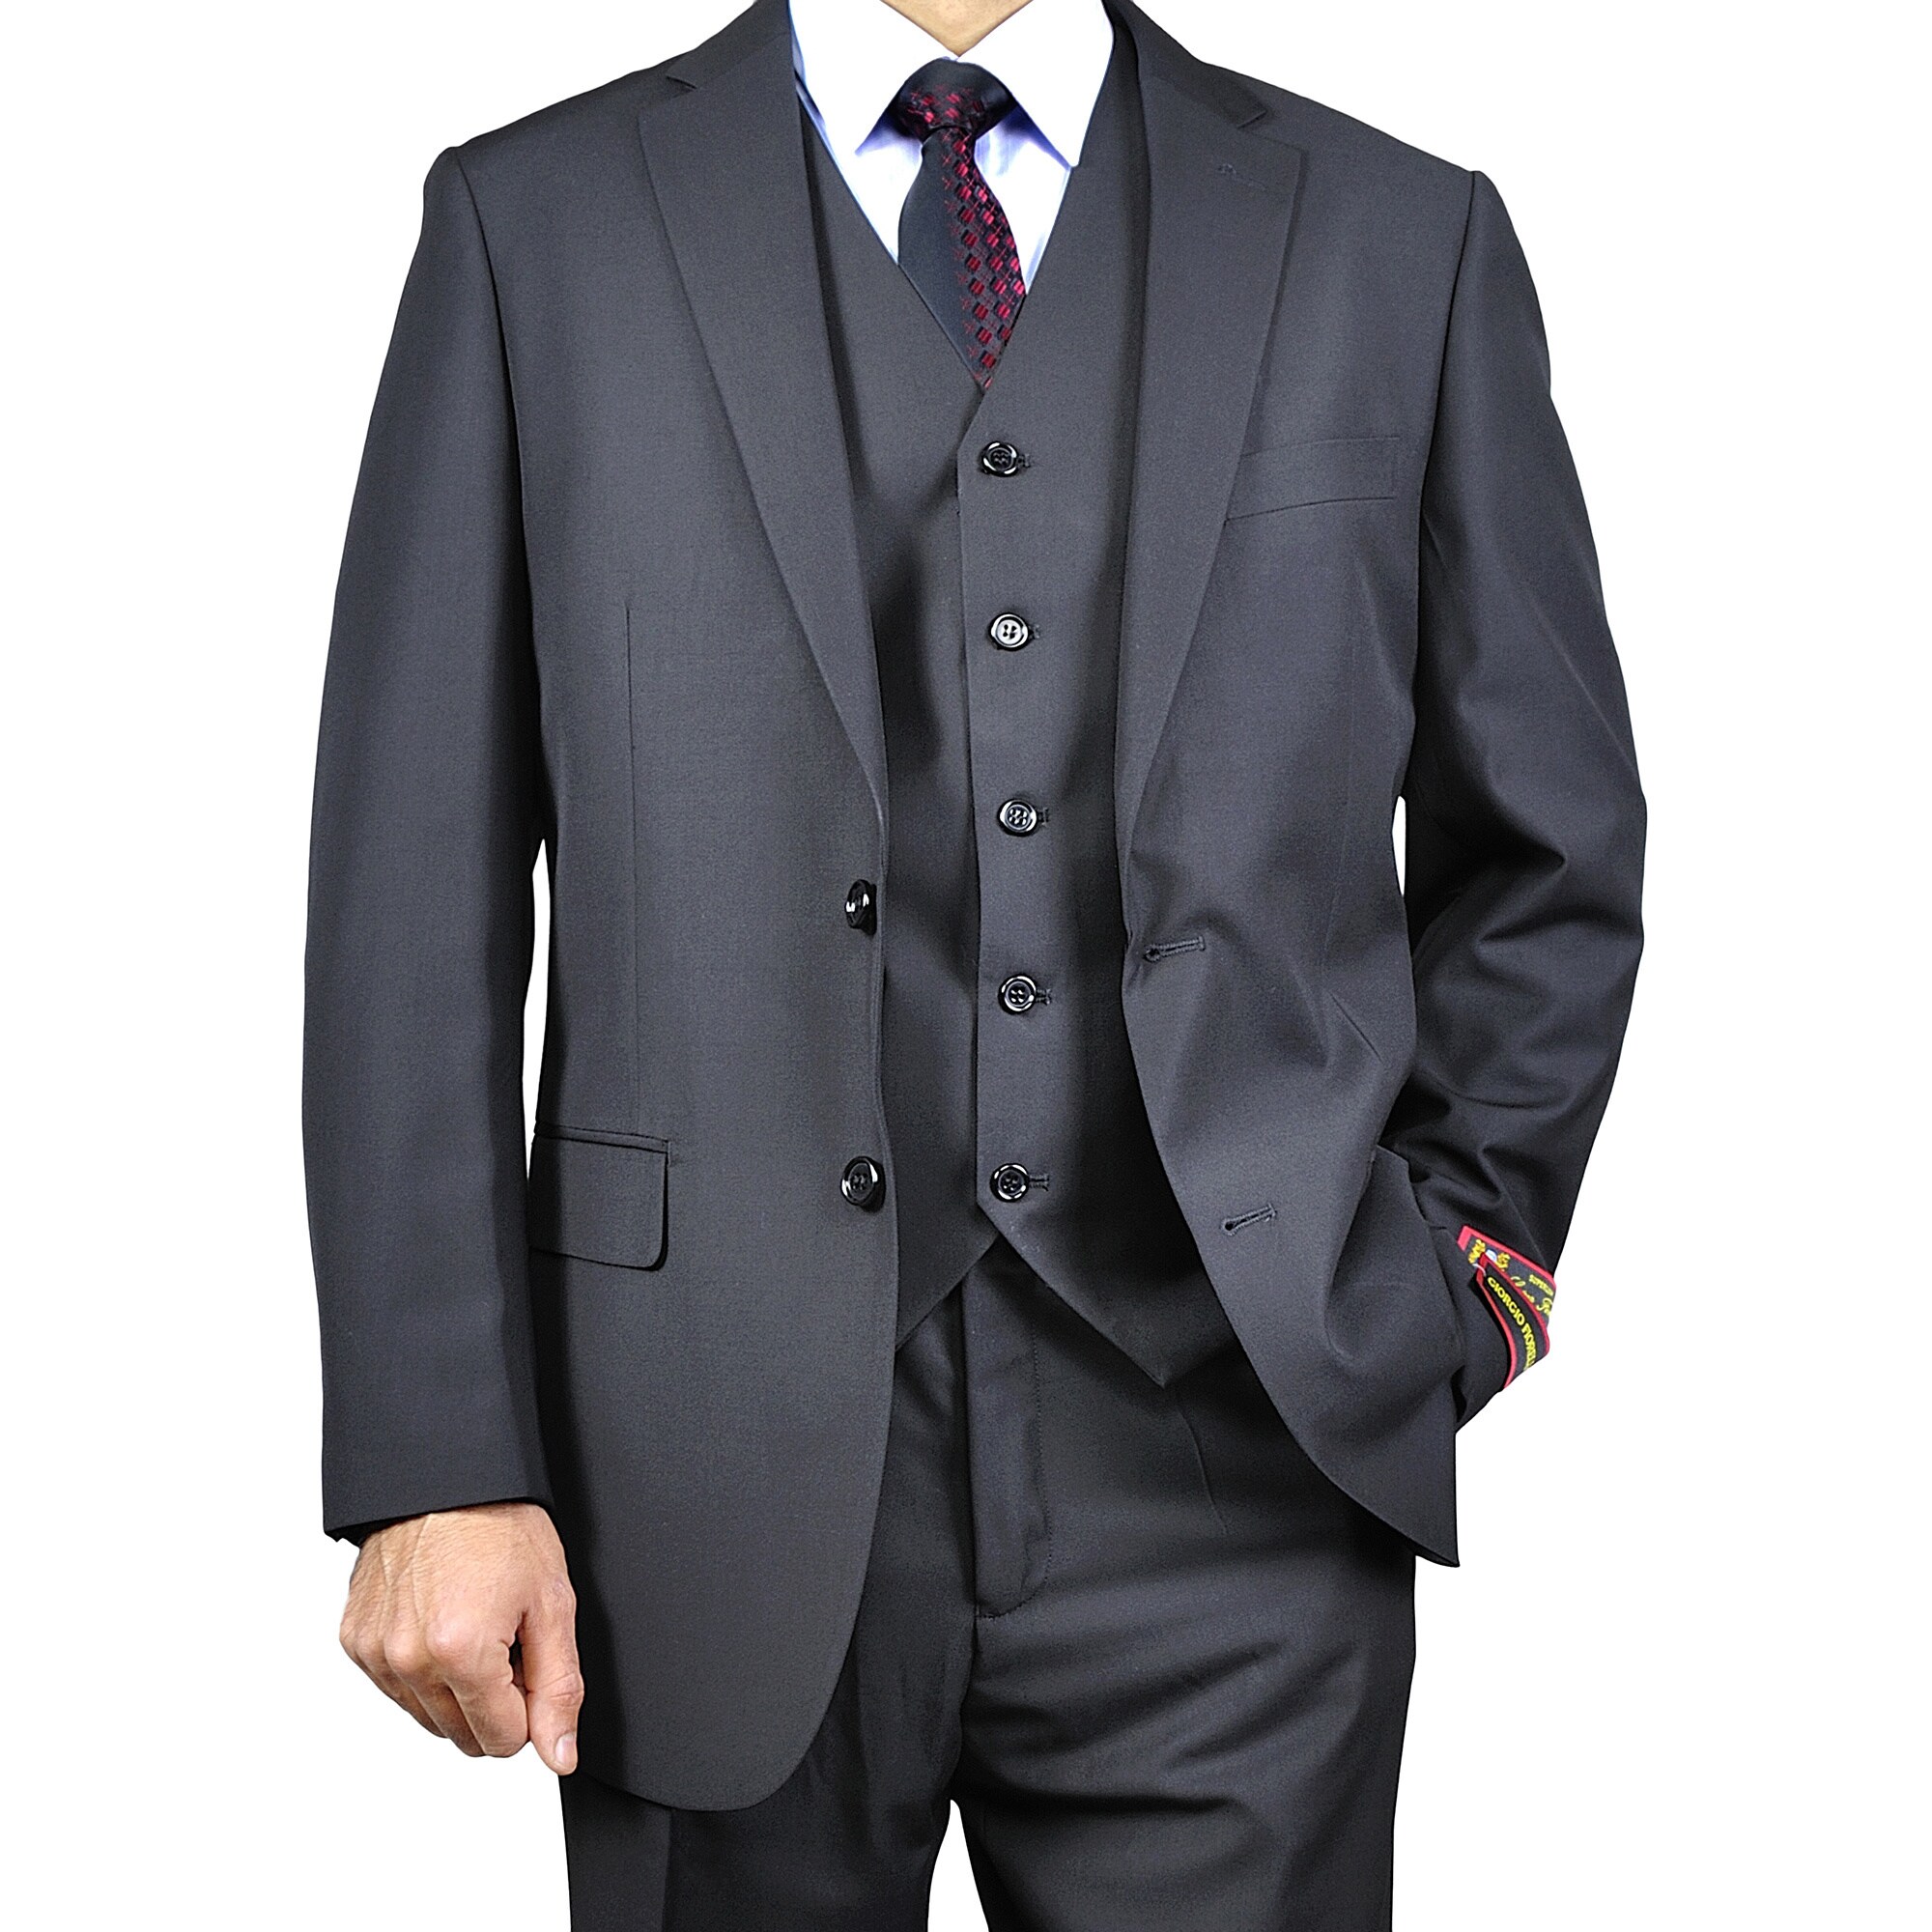 Men's Black Vested Suit - Overstock Shopping - Big Discounts on Suits